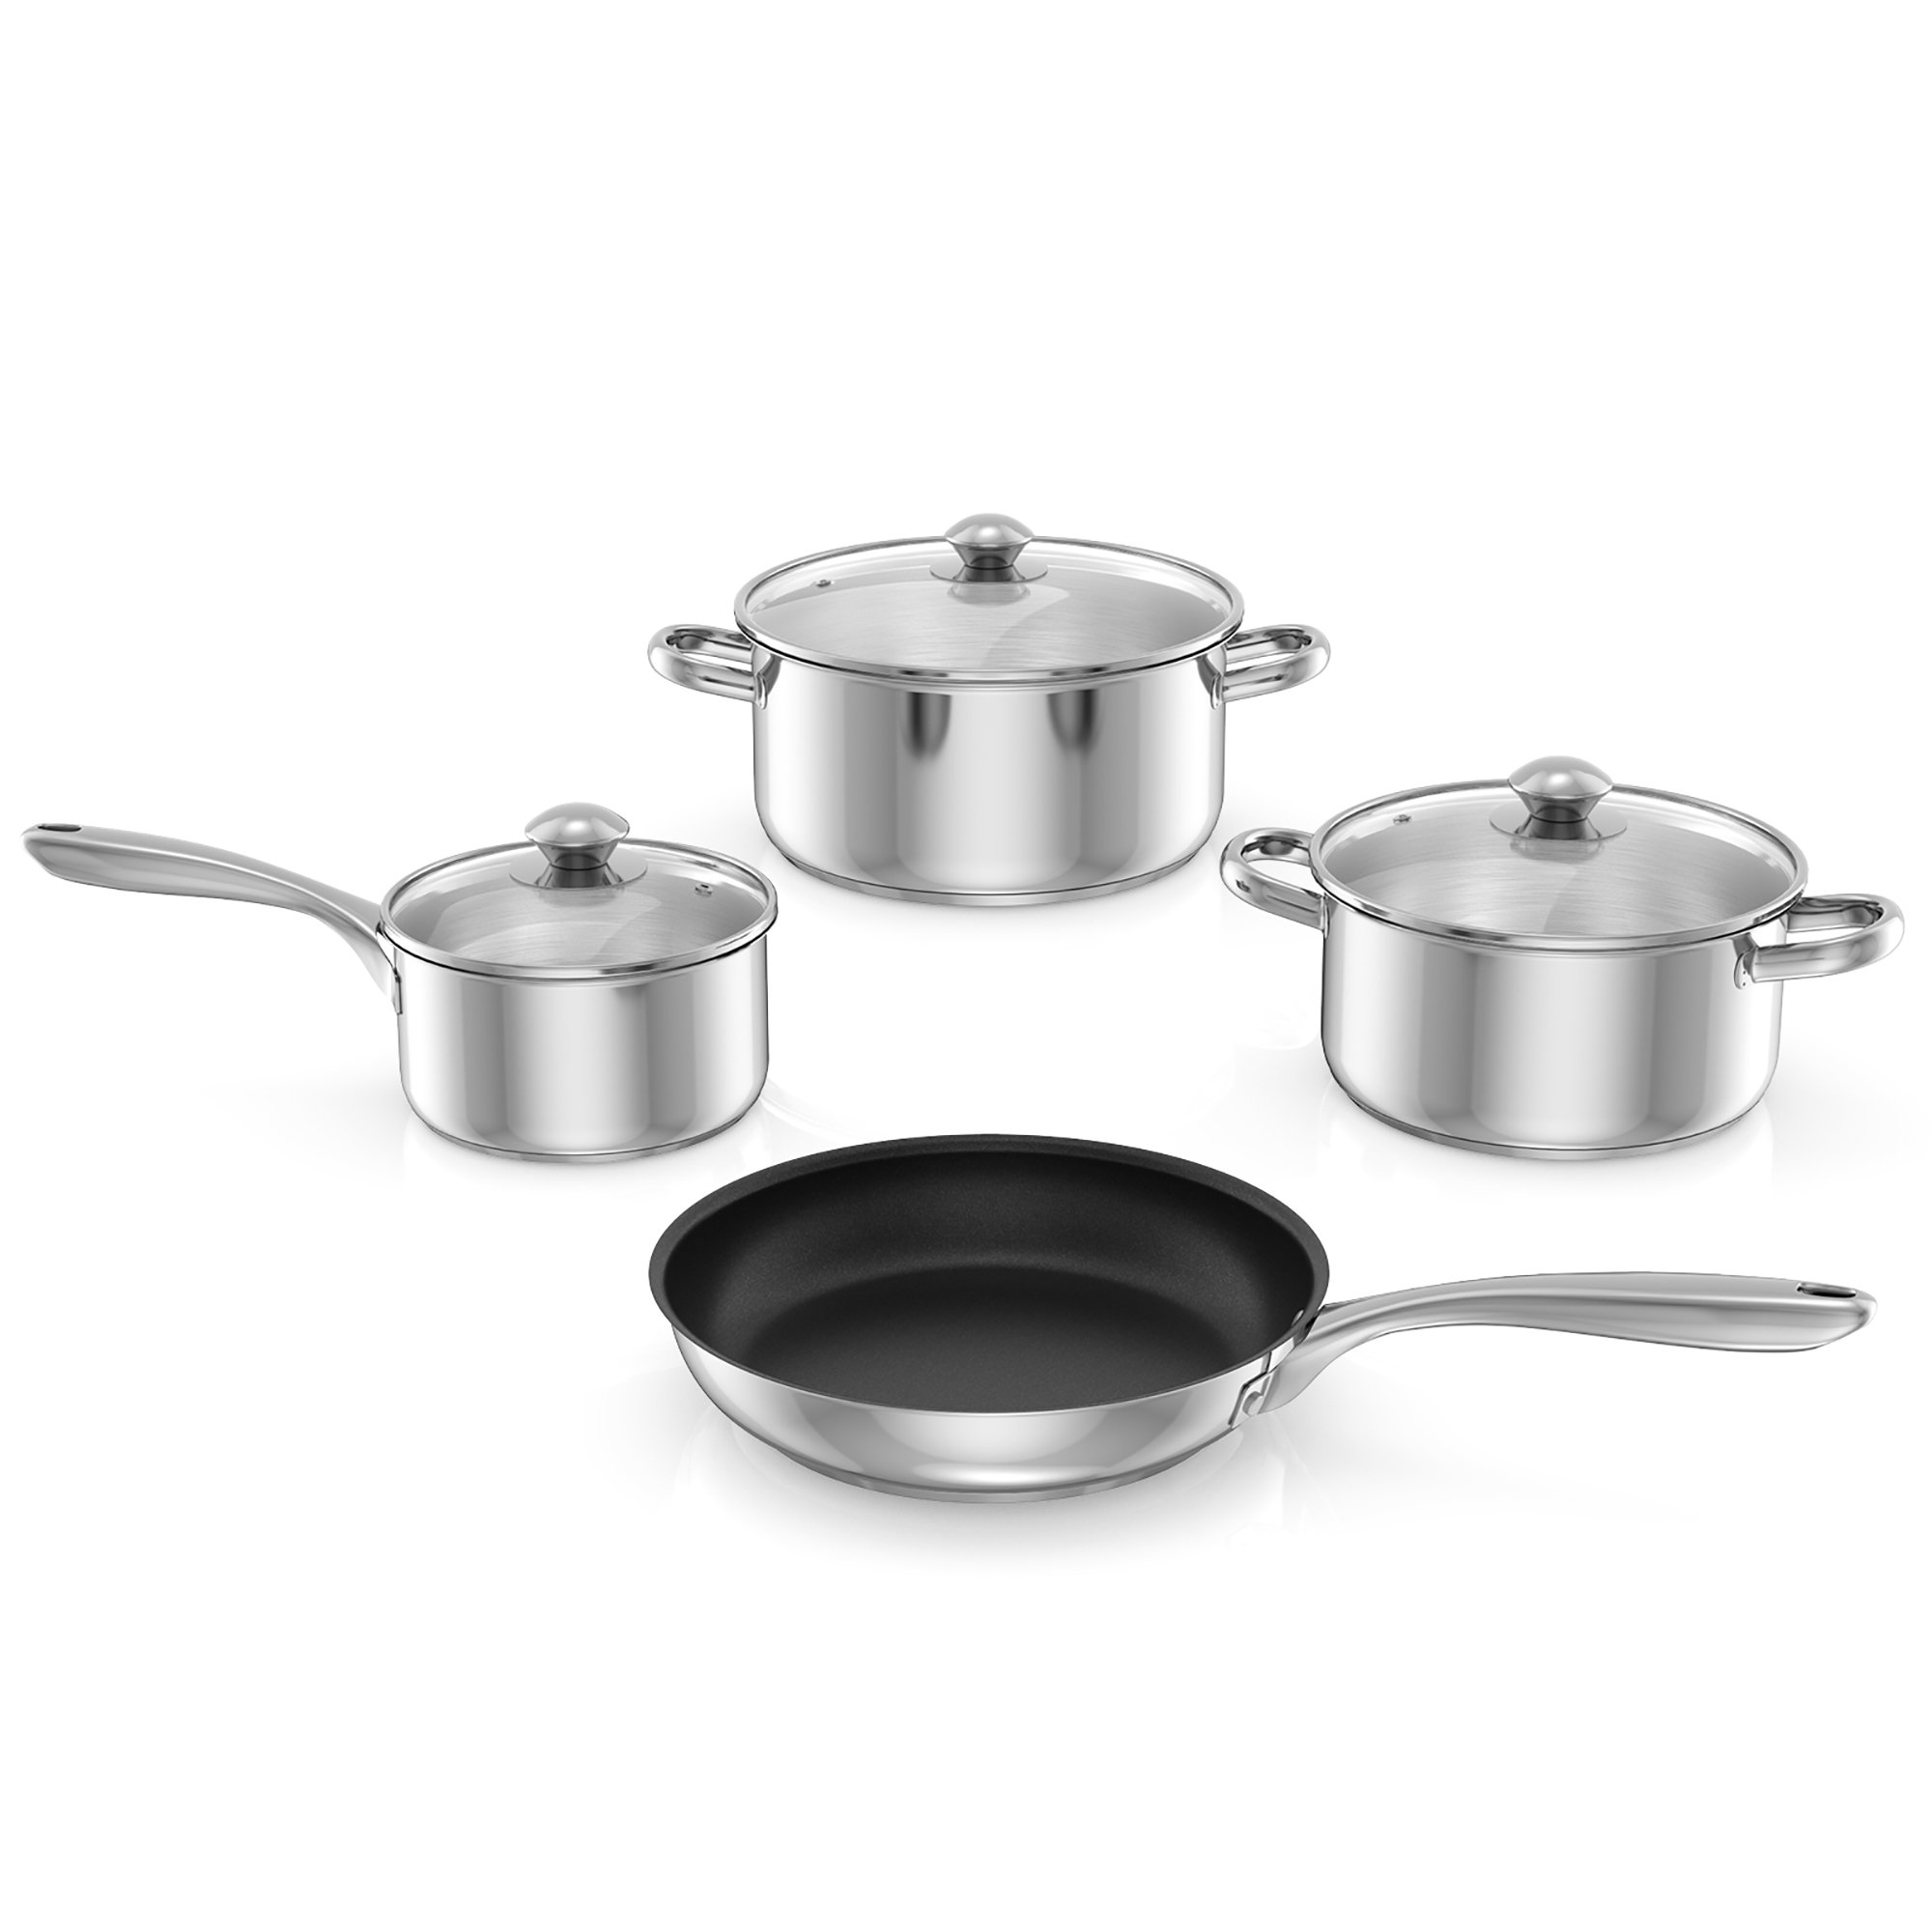 Meyer Accent Series Nonstick and Stainless Steel Induction Cookware Essentials Set, 6-Piece, Cinder and Smoke Edition